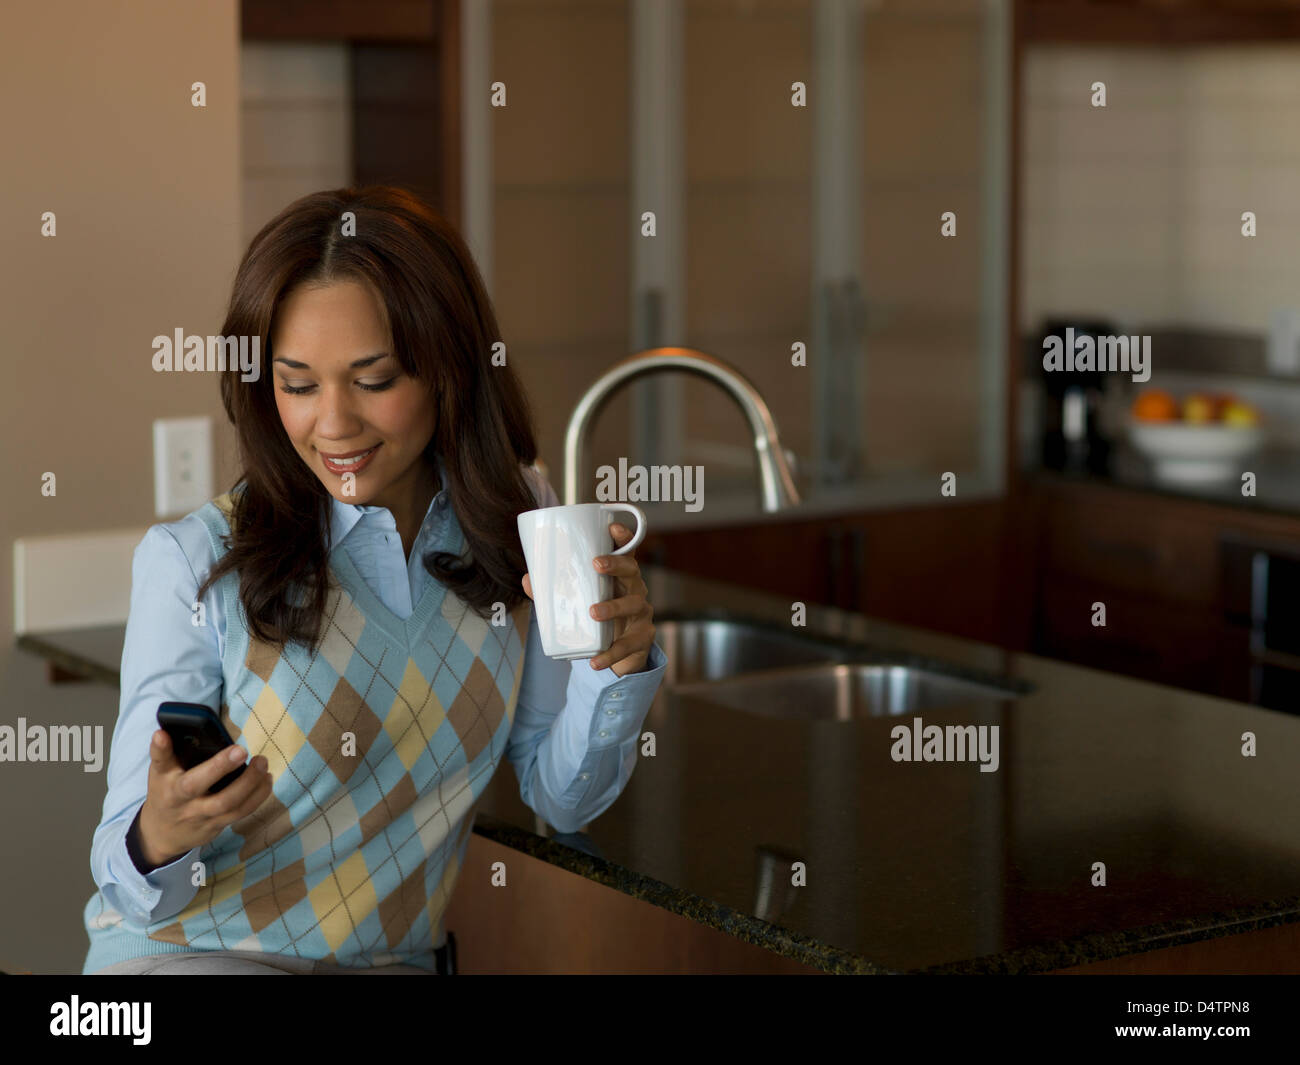 Businesswoman having cup of coffee Stock Photo